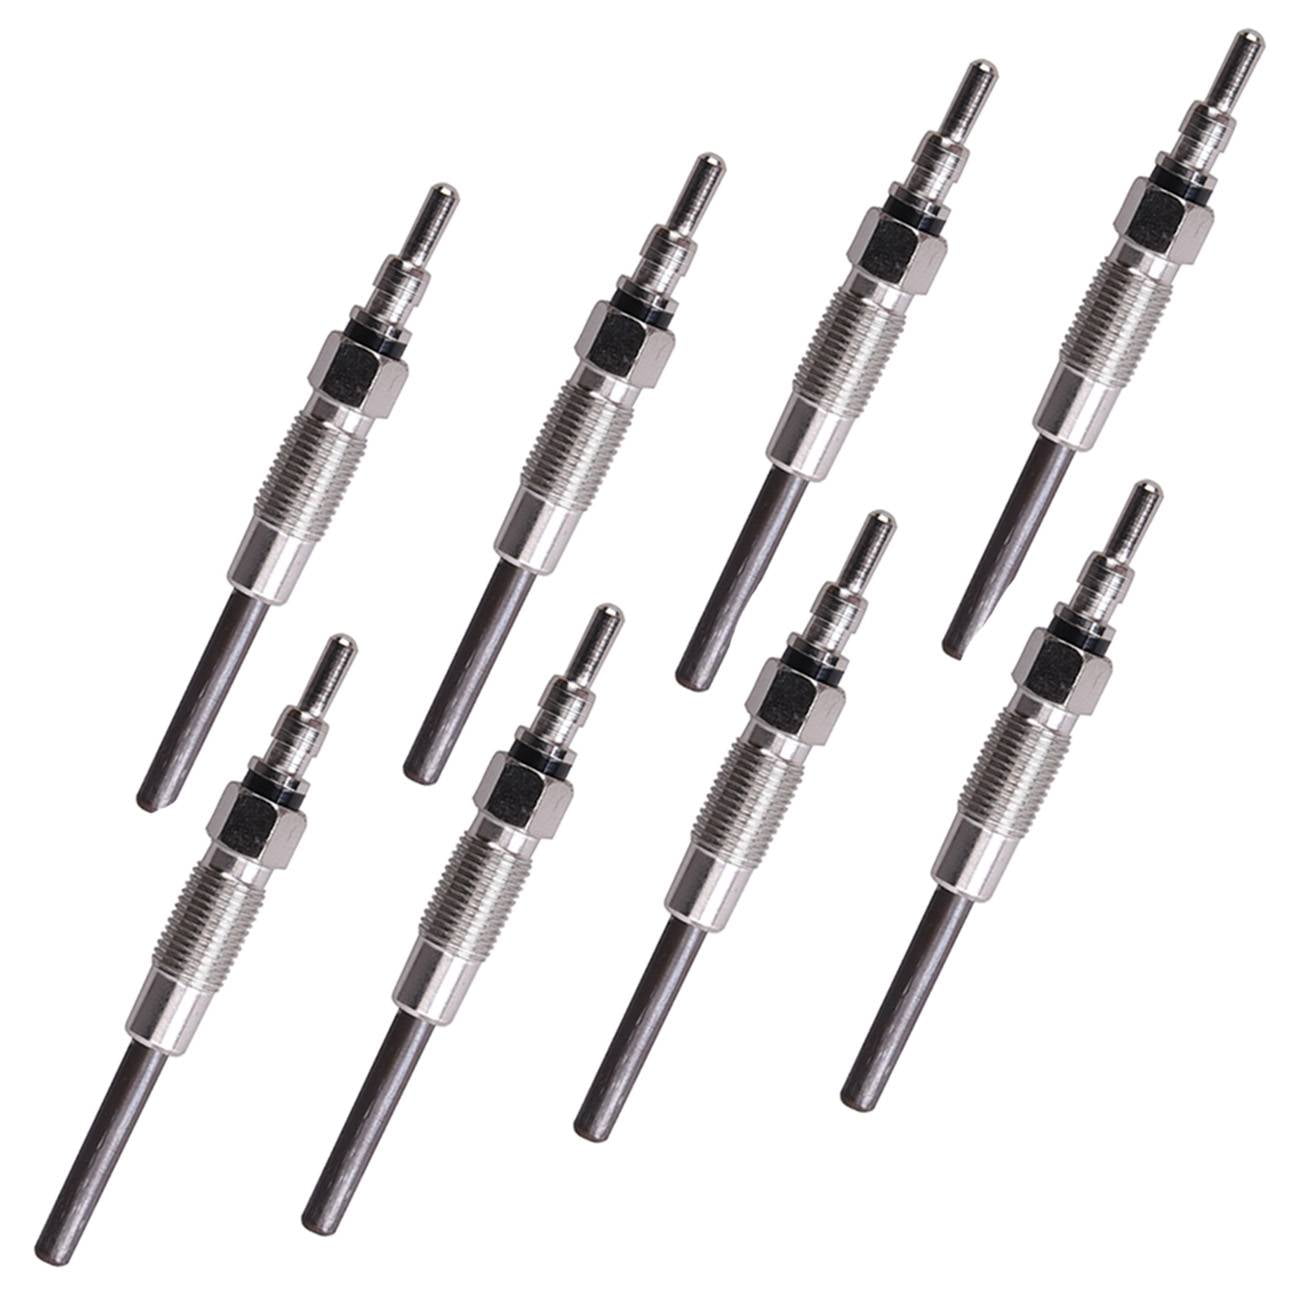 Bapmic F2TZ-12A342-A Diesel Glow Plugs Compatible with 1988-1994 Ford F350 F250 E250 E350 ESD FSD Econoline Pack of 8 